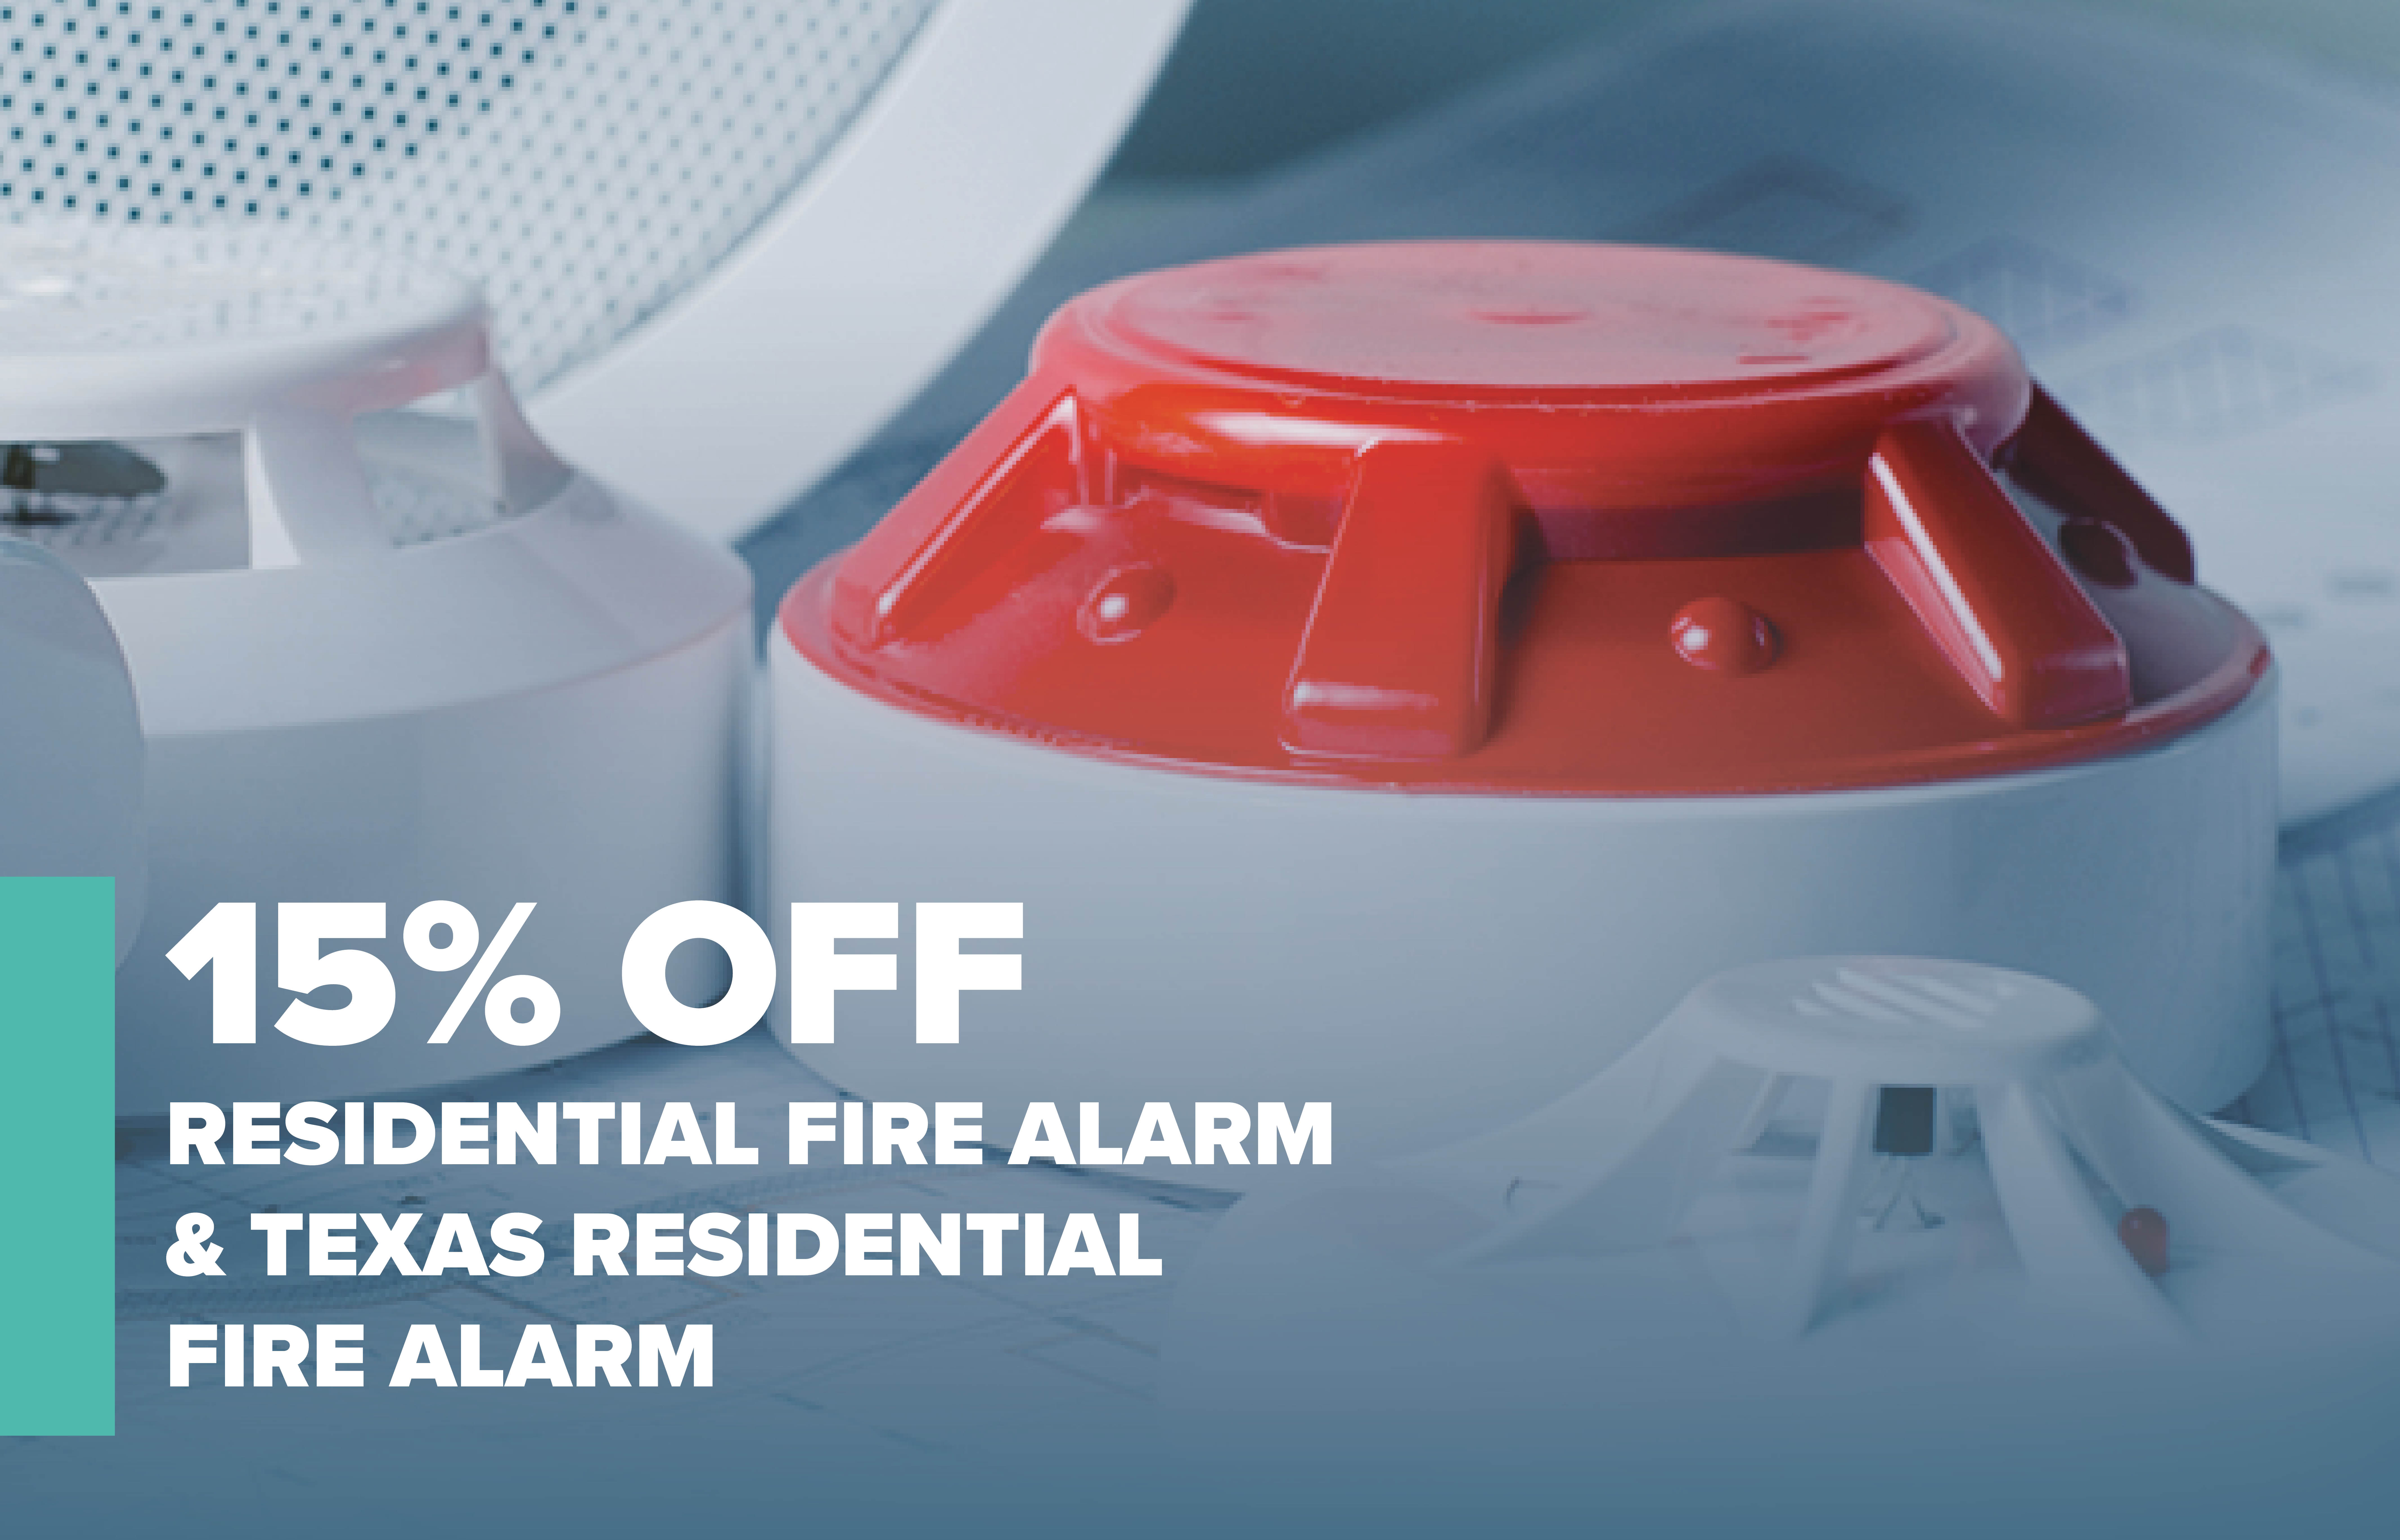 Save 15% on Residential Fire Alarm Courses Through October